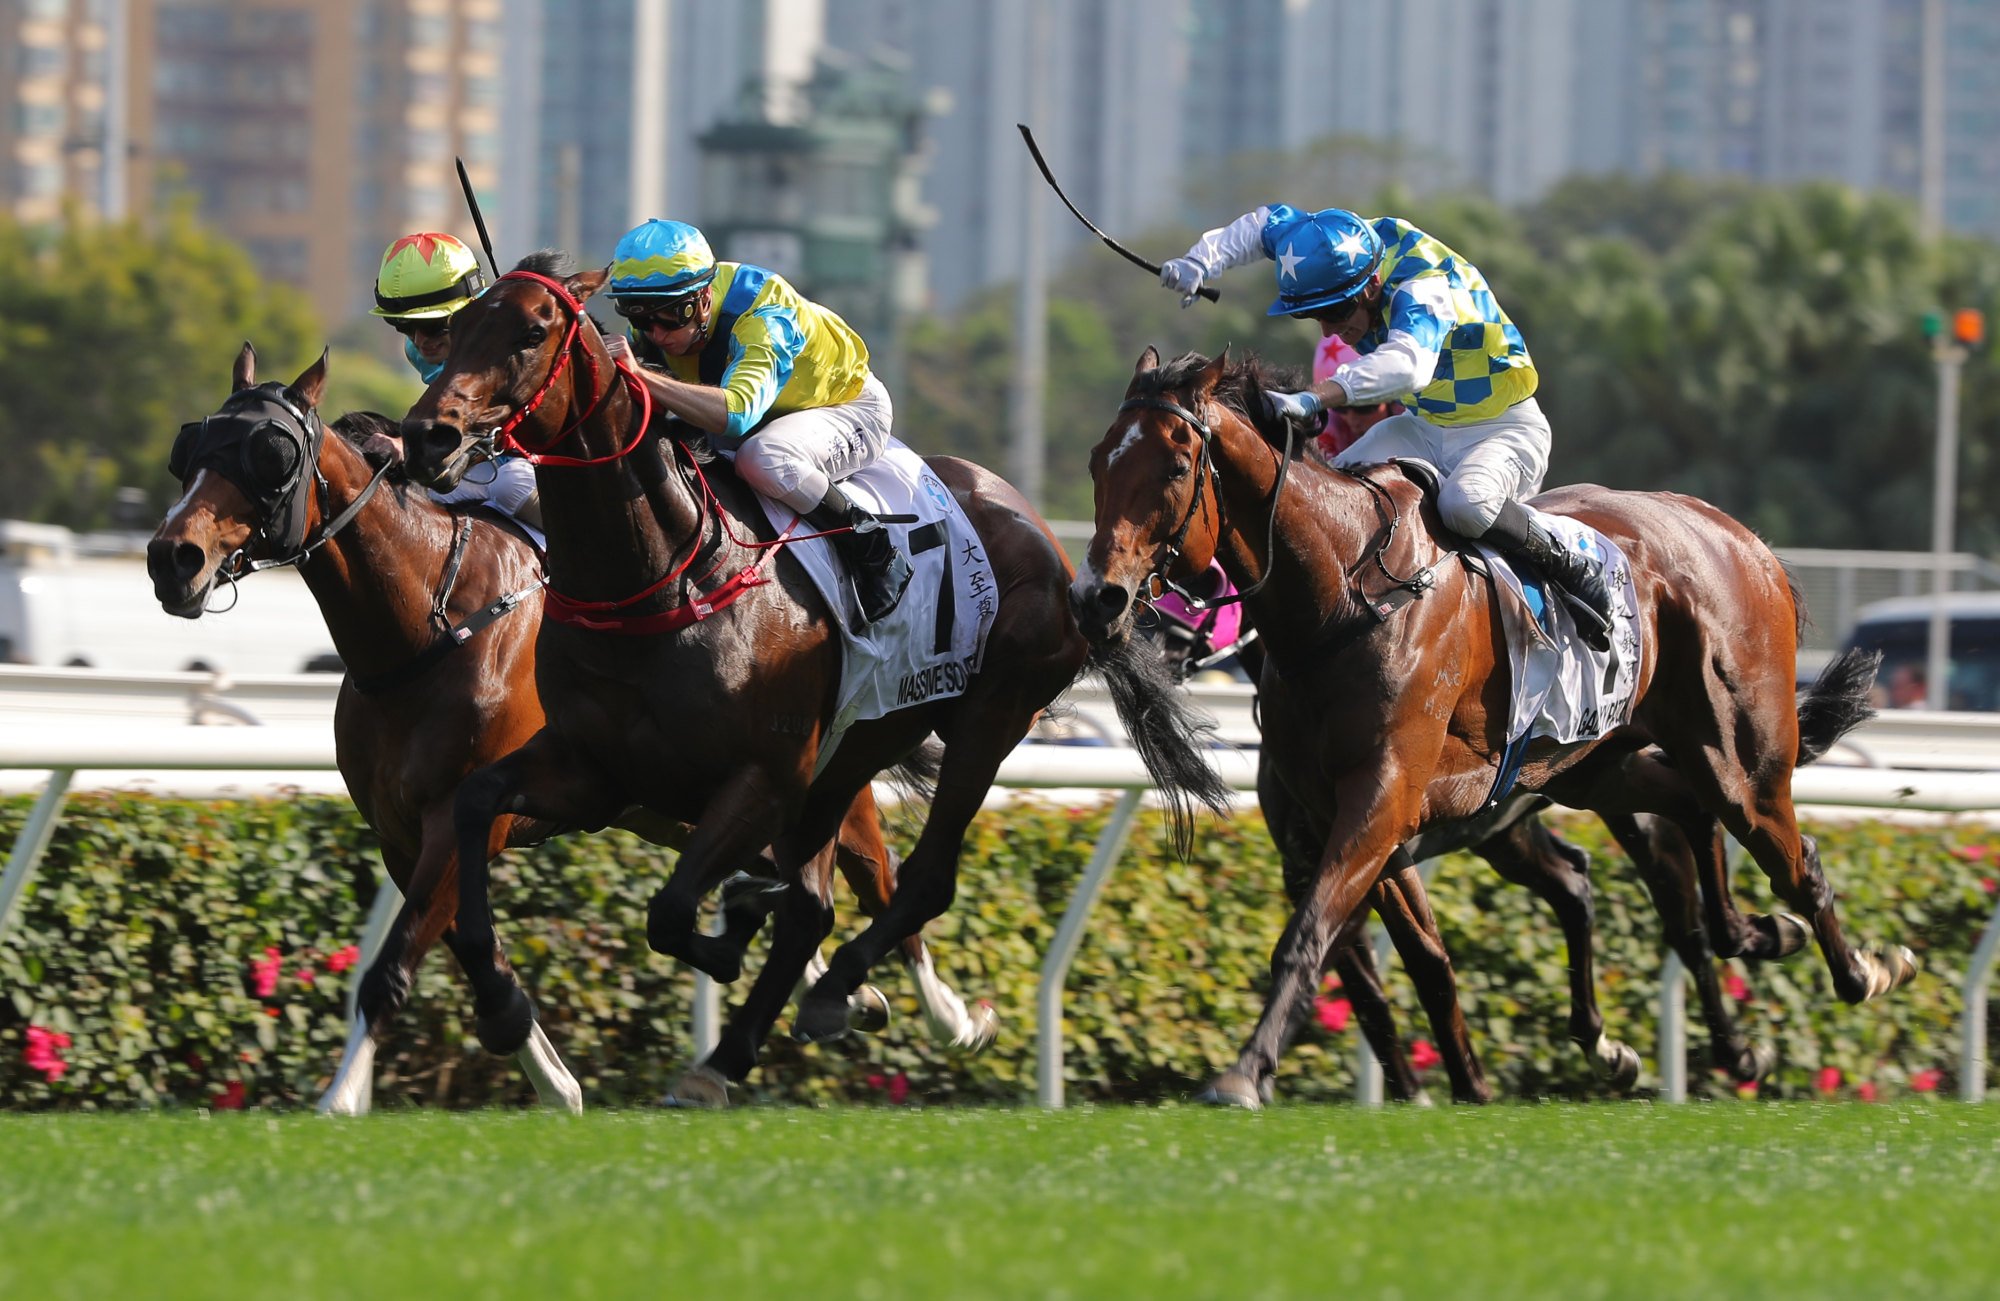 Massive Sovereign (centre) defies Galaxy Patch (outside) and Ka Ying Generation in the Hong Kong Derby.